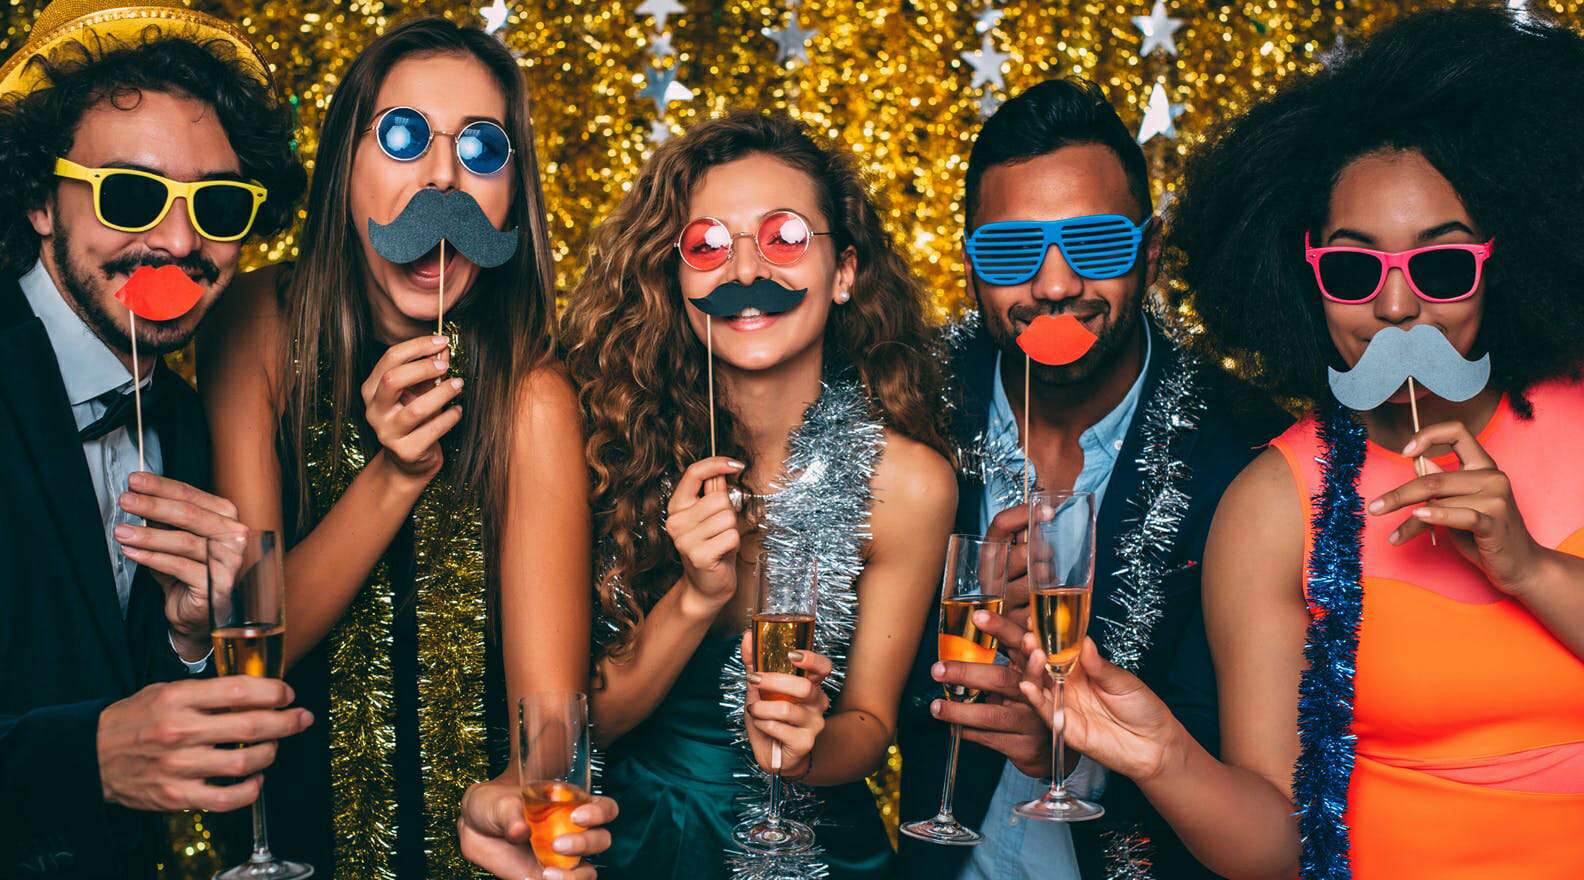 How To Ensure This Year’s Office Christmas Party Includes Everyone